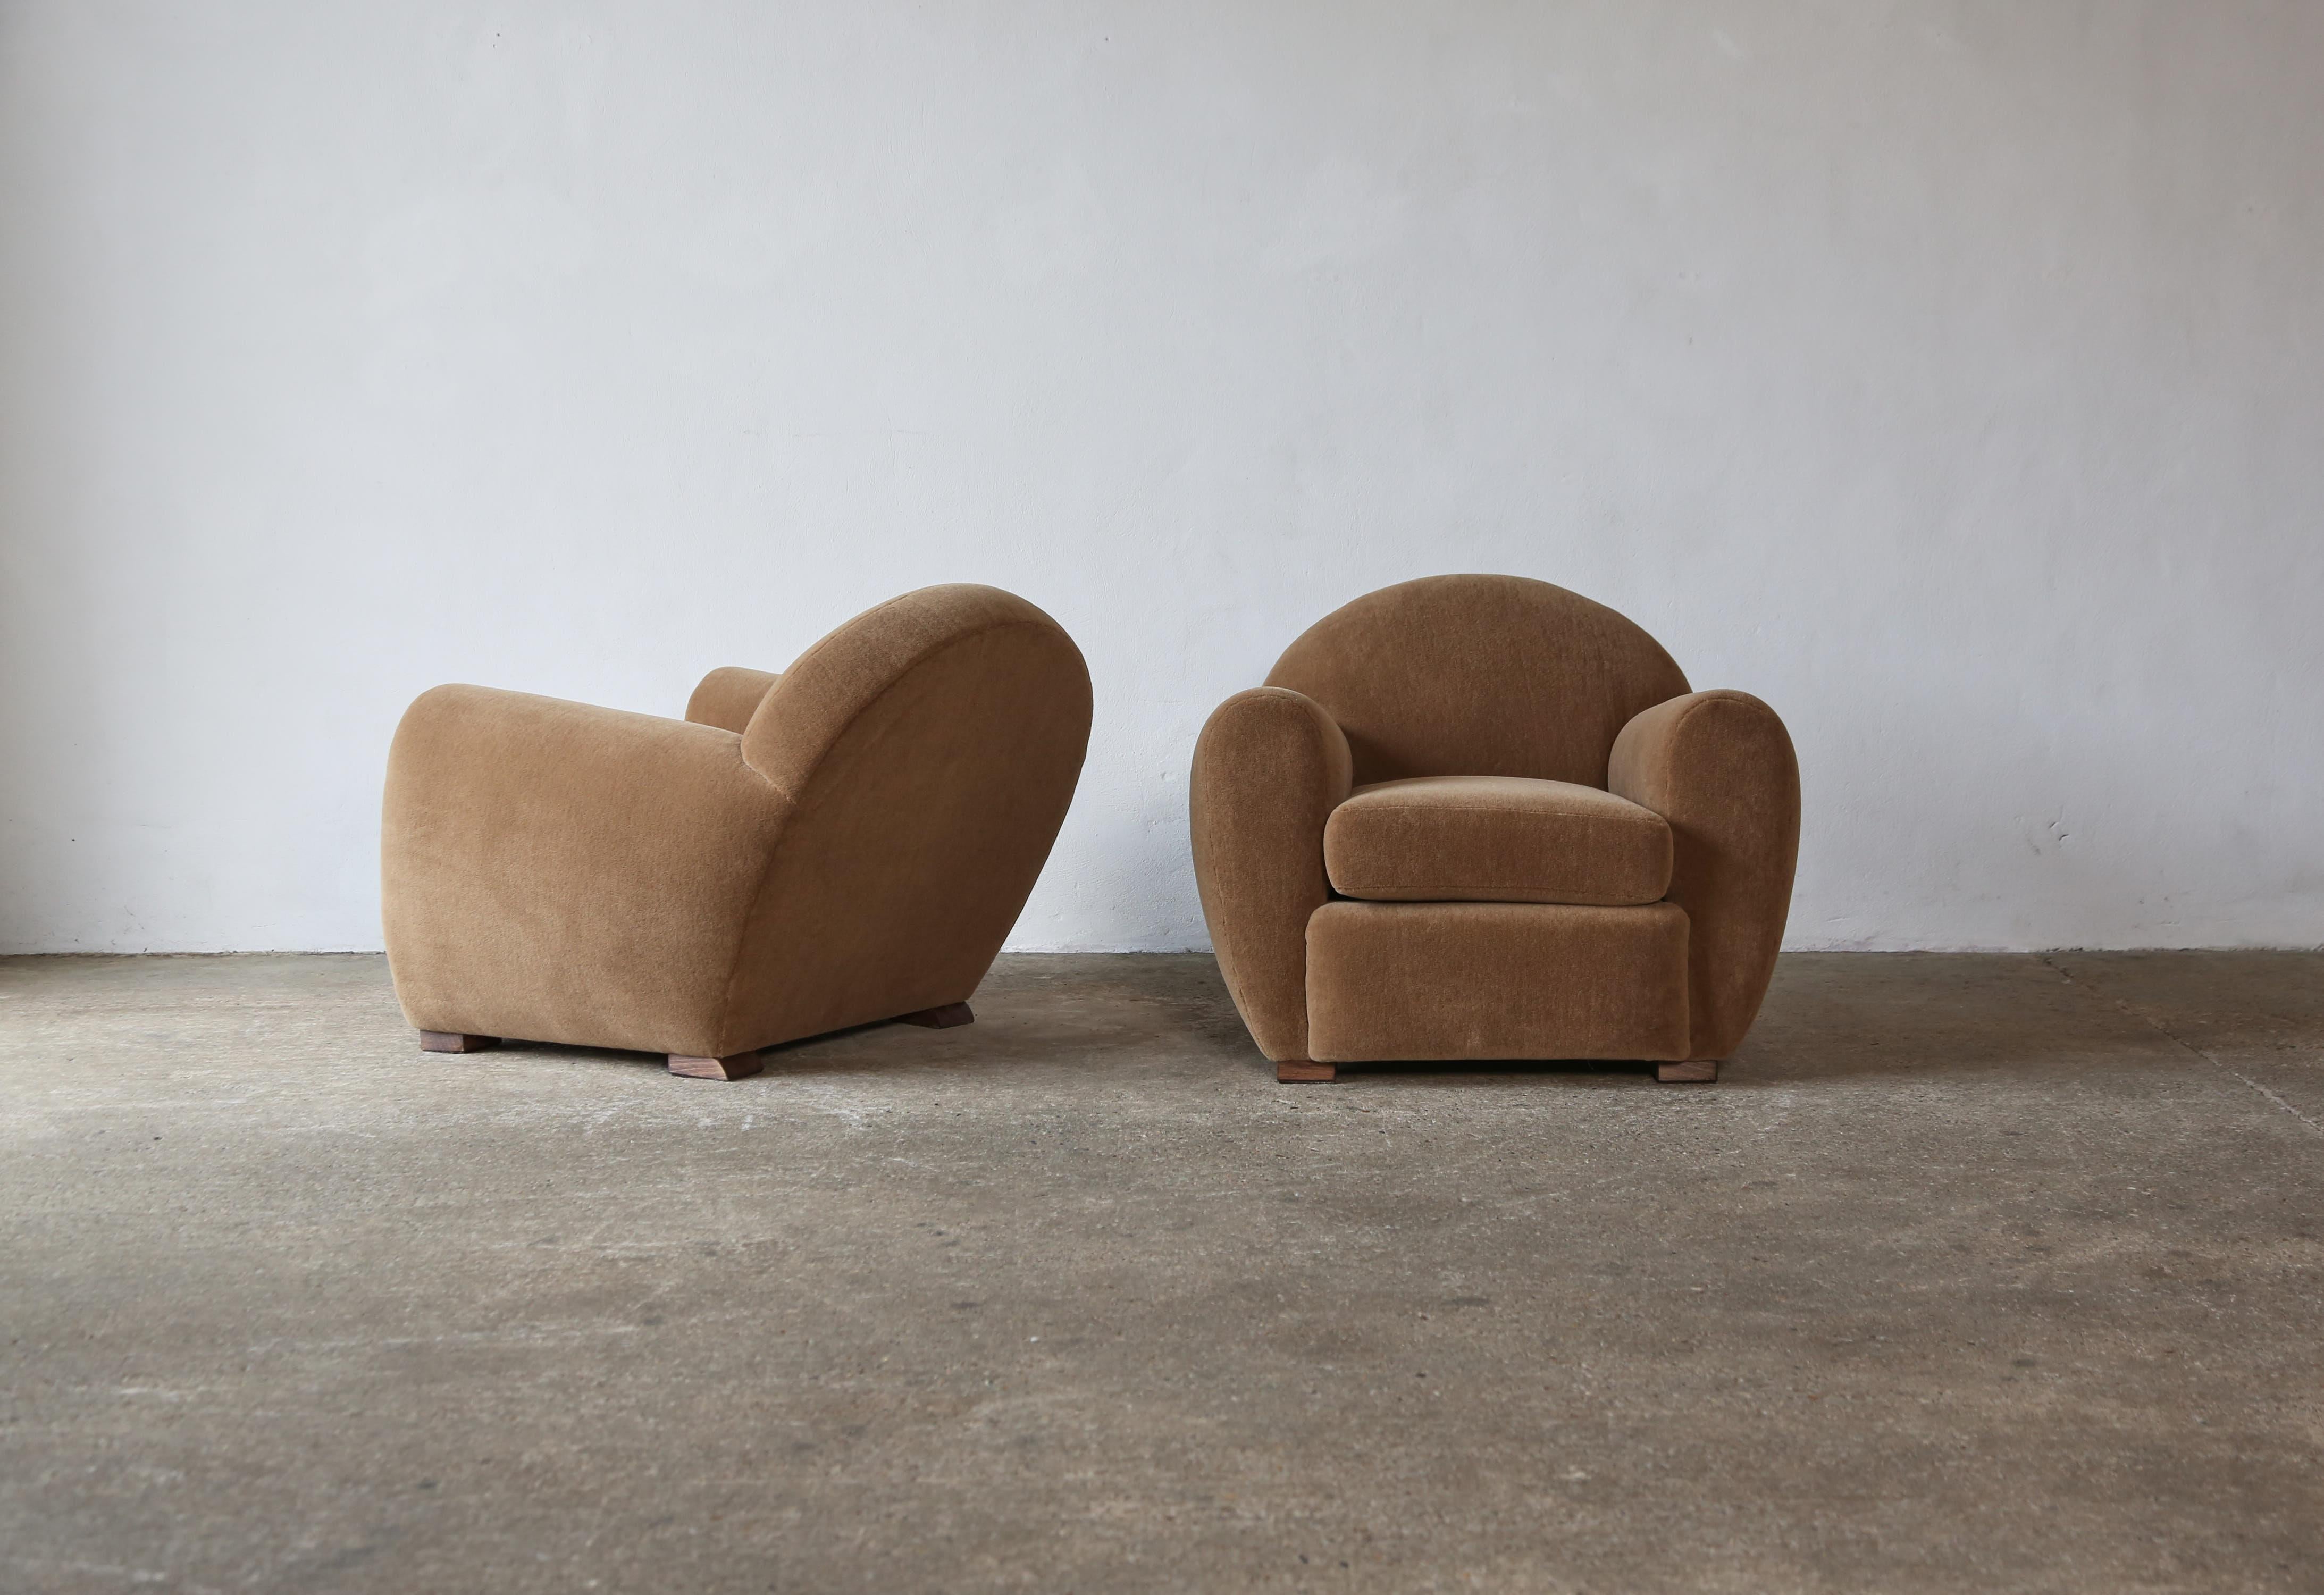 Superb pair of round, leaning modern club chairs, upholstered in pure Alpaca fabric.  High quality handmade beech frames and upholstered in a soft, golden brown, premium 100% alpaca wool fabric.    Available in COM.   Fast shipping worldwide.

